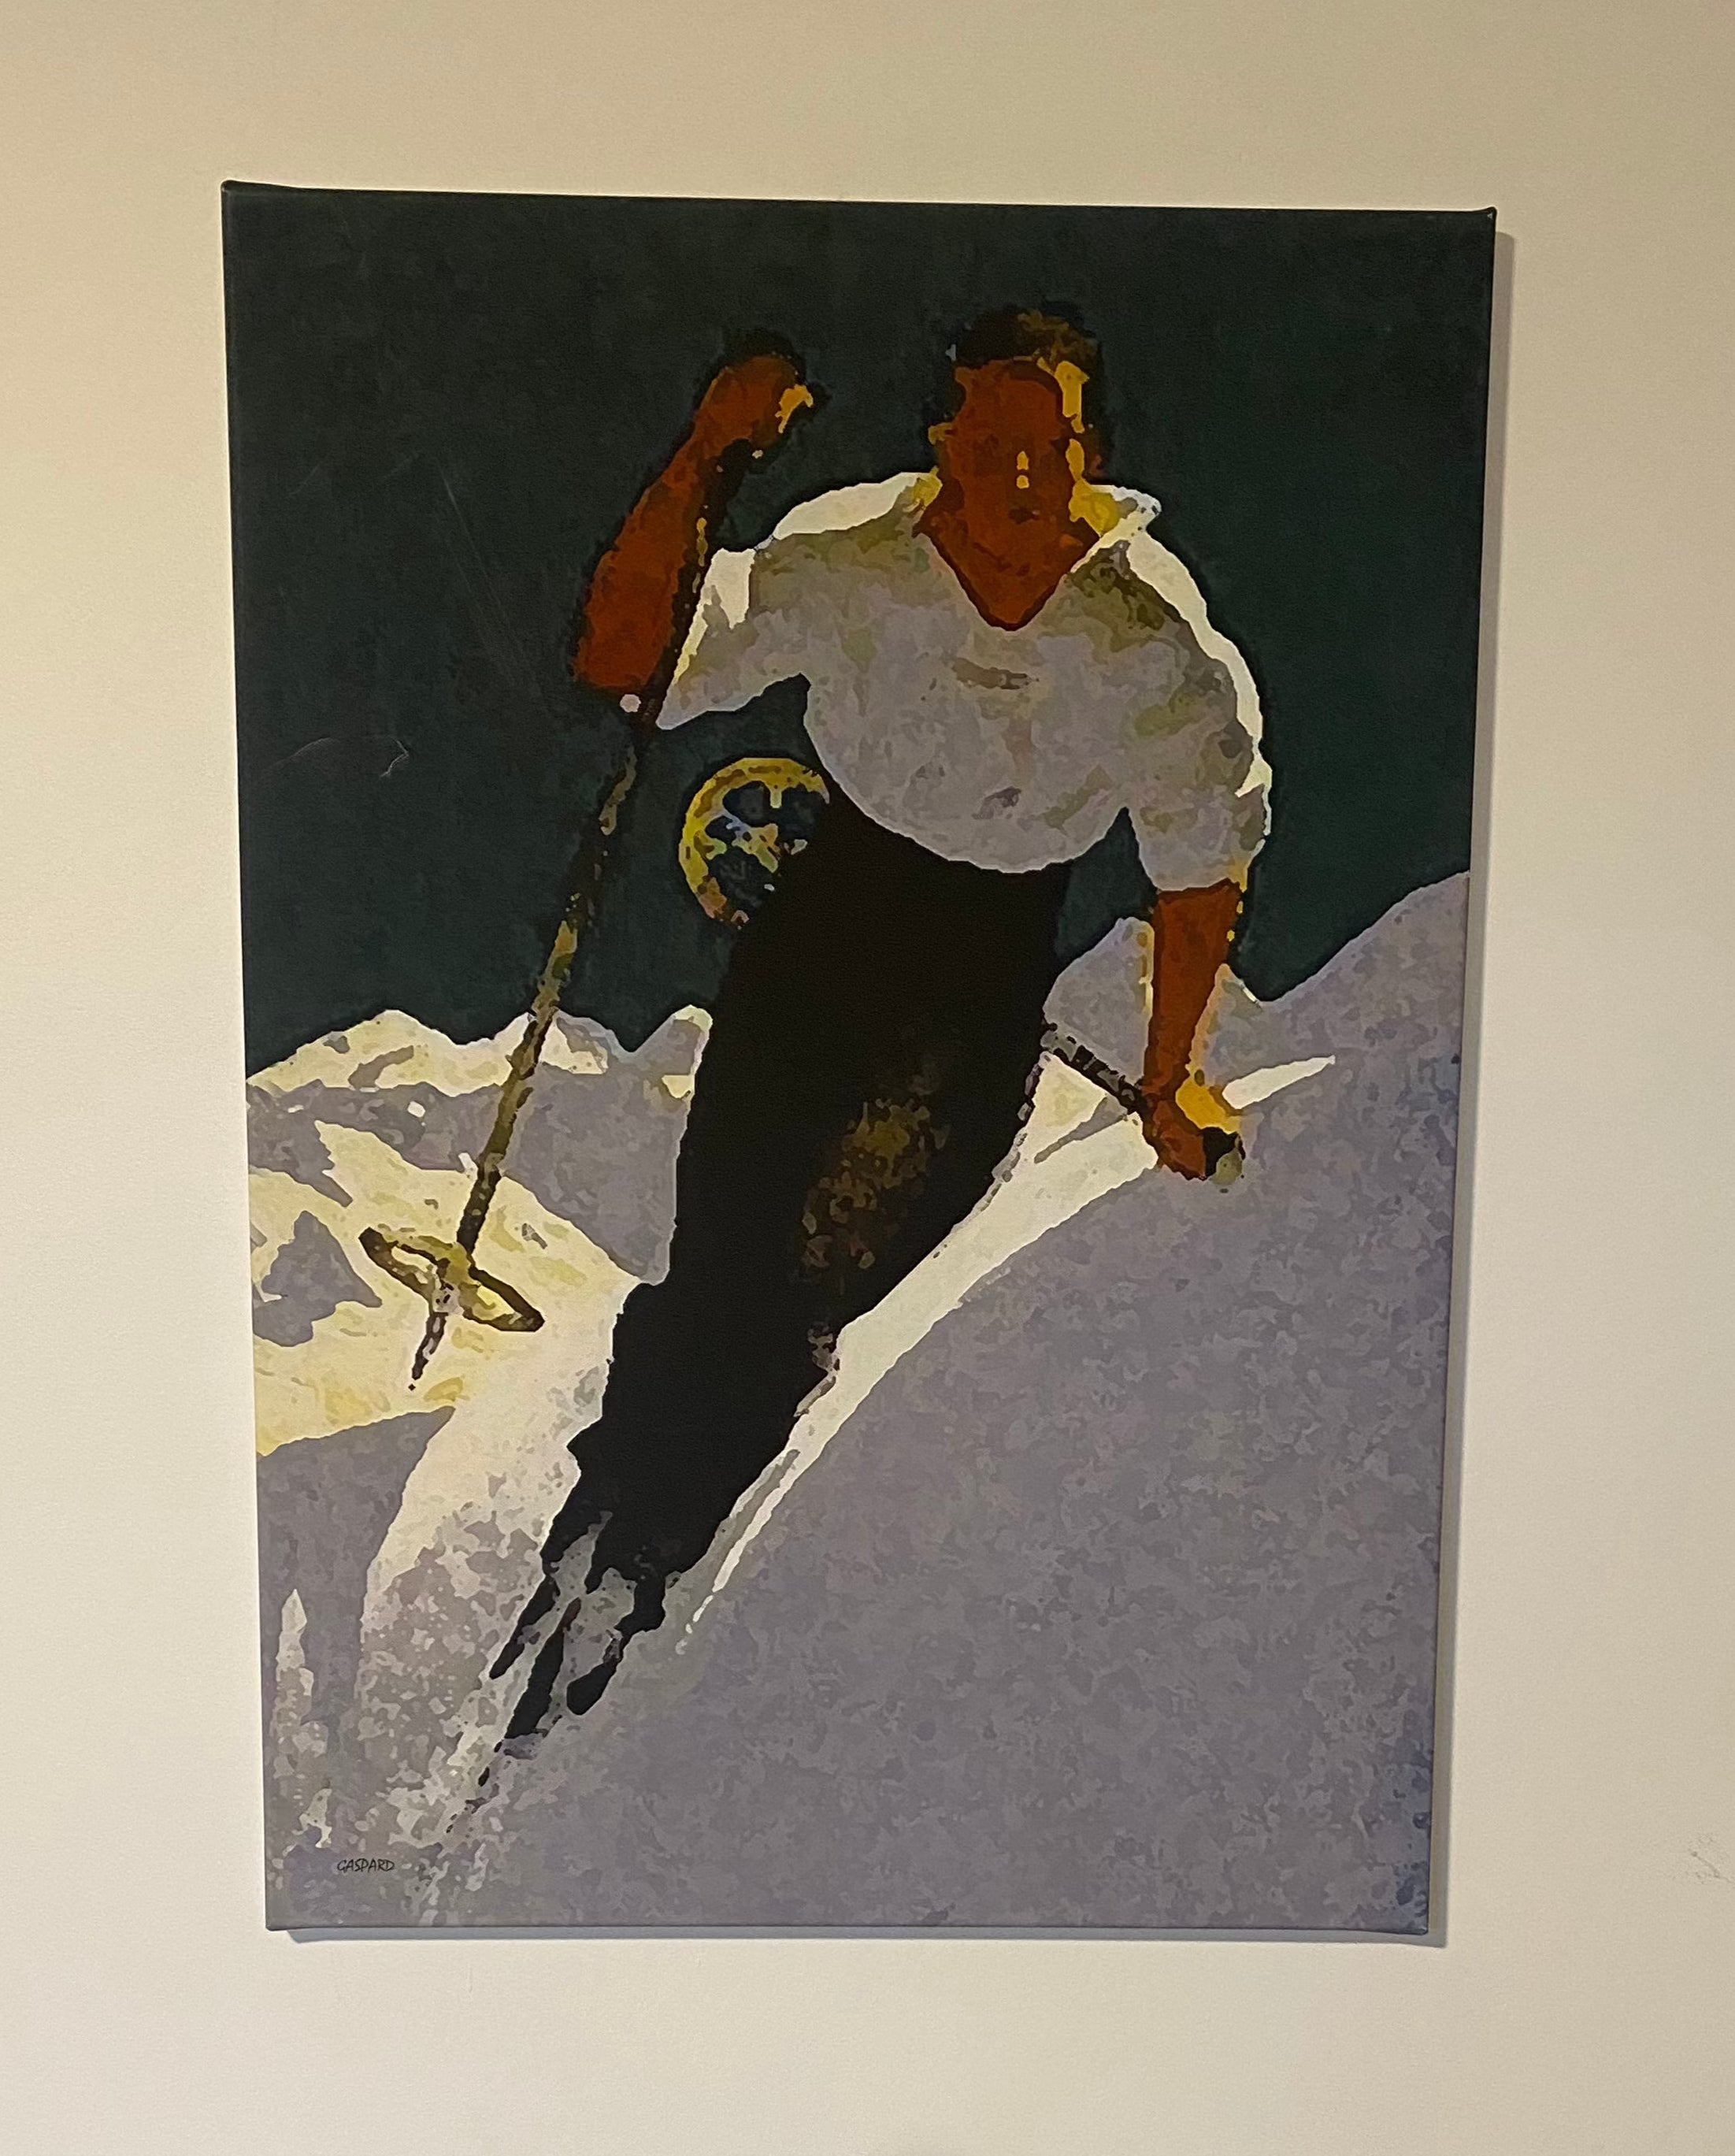 Canvas print of a man in a white shirt and blue pants skiing downhill, leaning left into the hill with mountains in the background below a dark green-blue tinged sky.  Hanging on a white wall